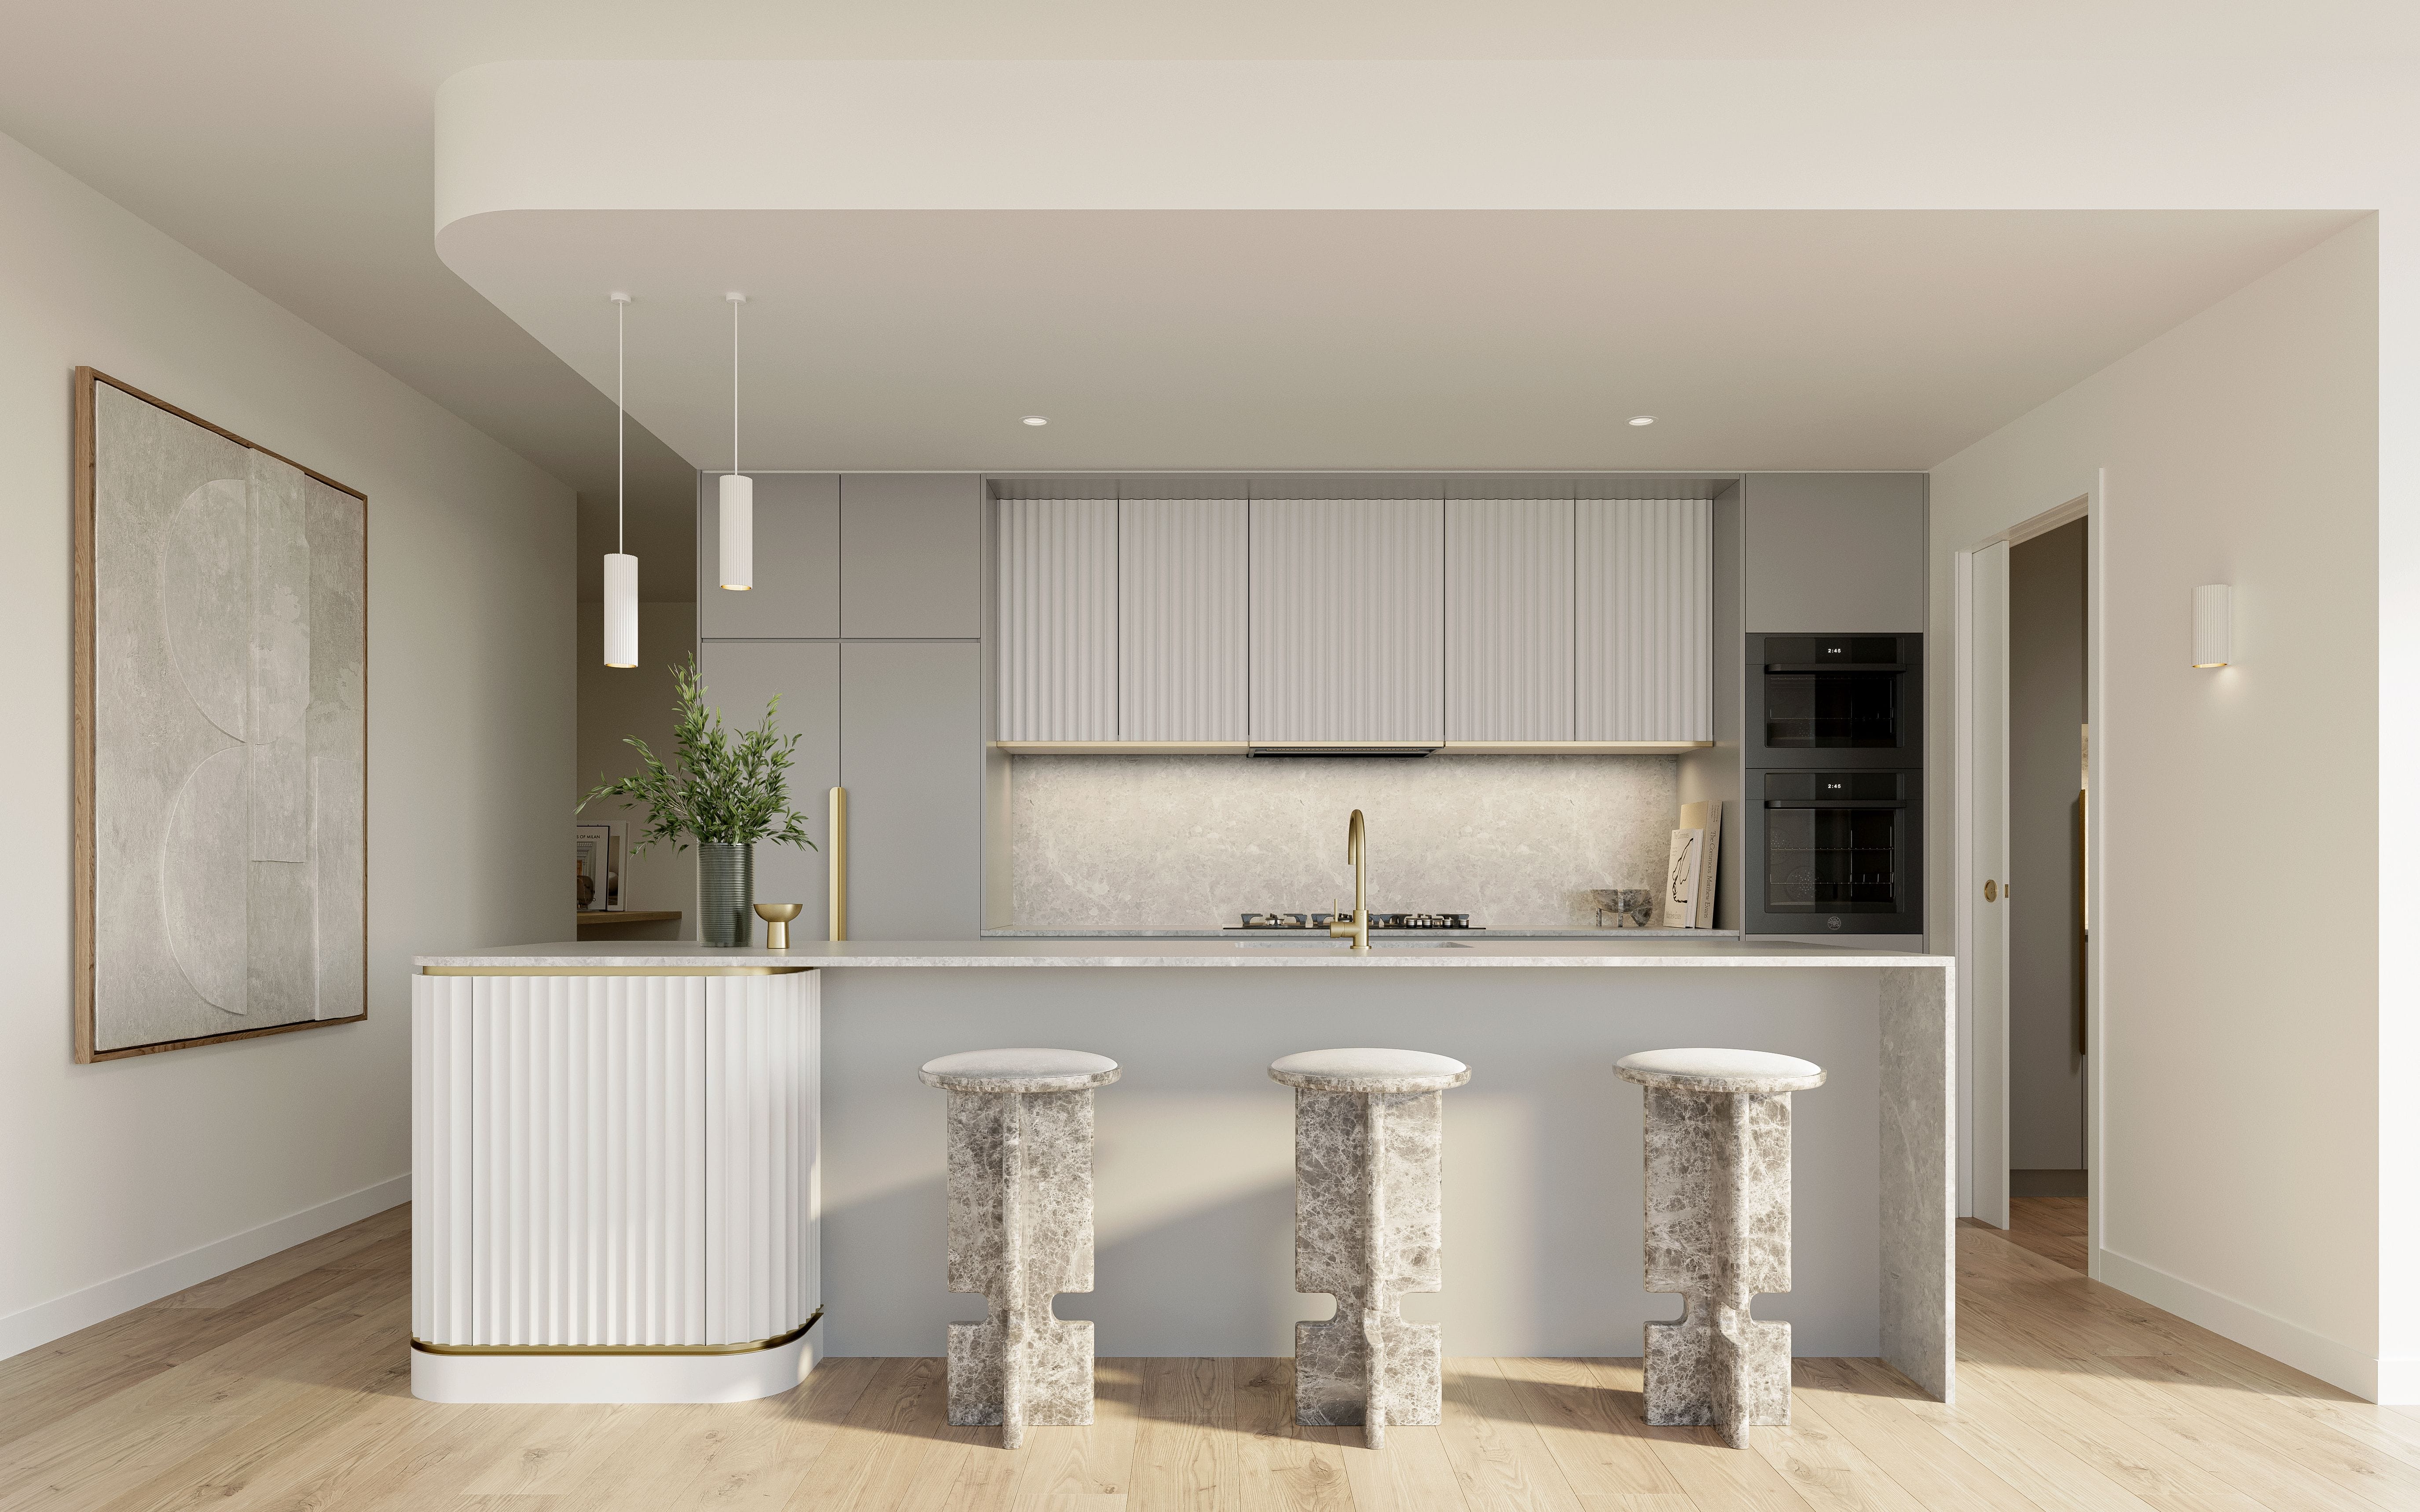 A render of the kitchen in Holm's apartments